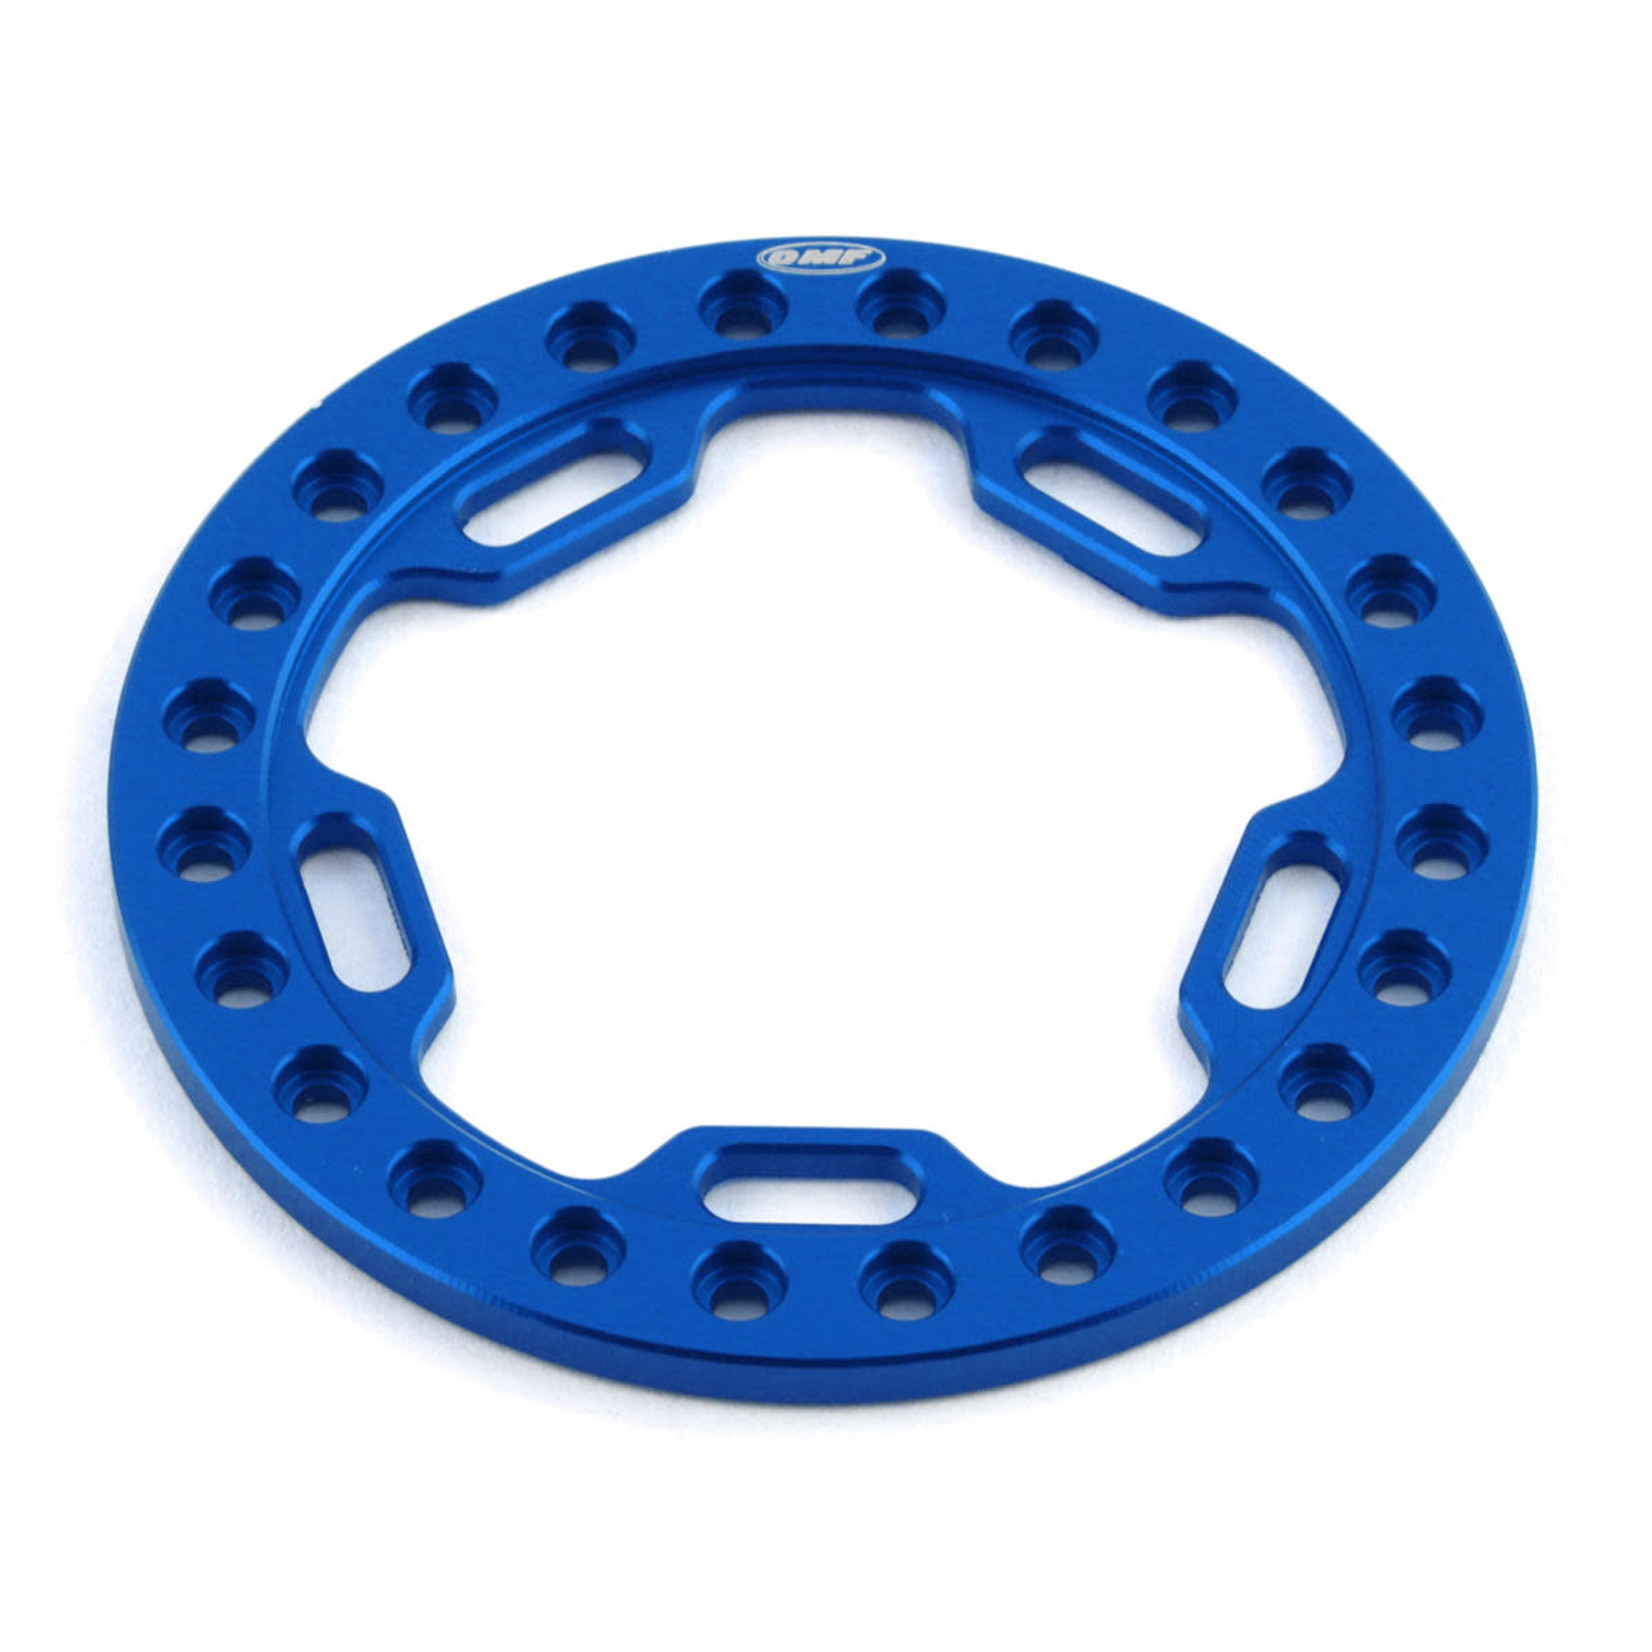 Vanquish Products Vanquish Products OMF 1.9" Phase 5 Beadlock Ring (Blue) #VPS05114